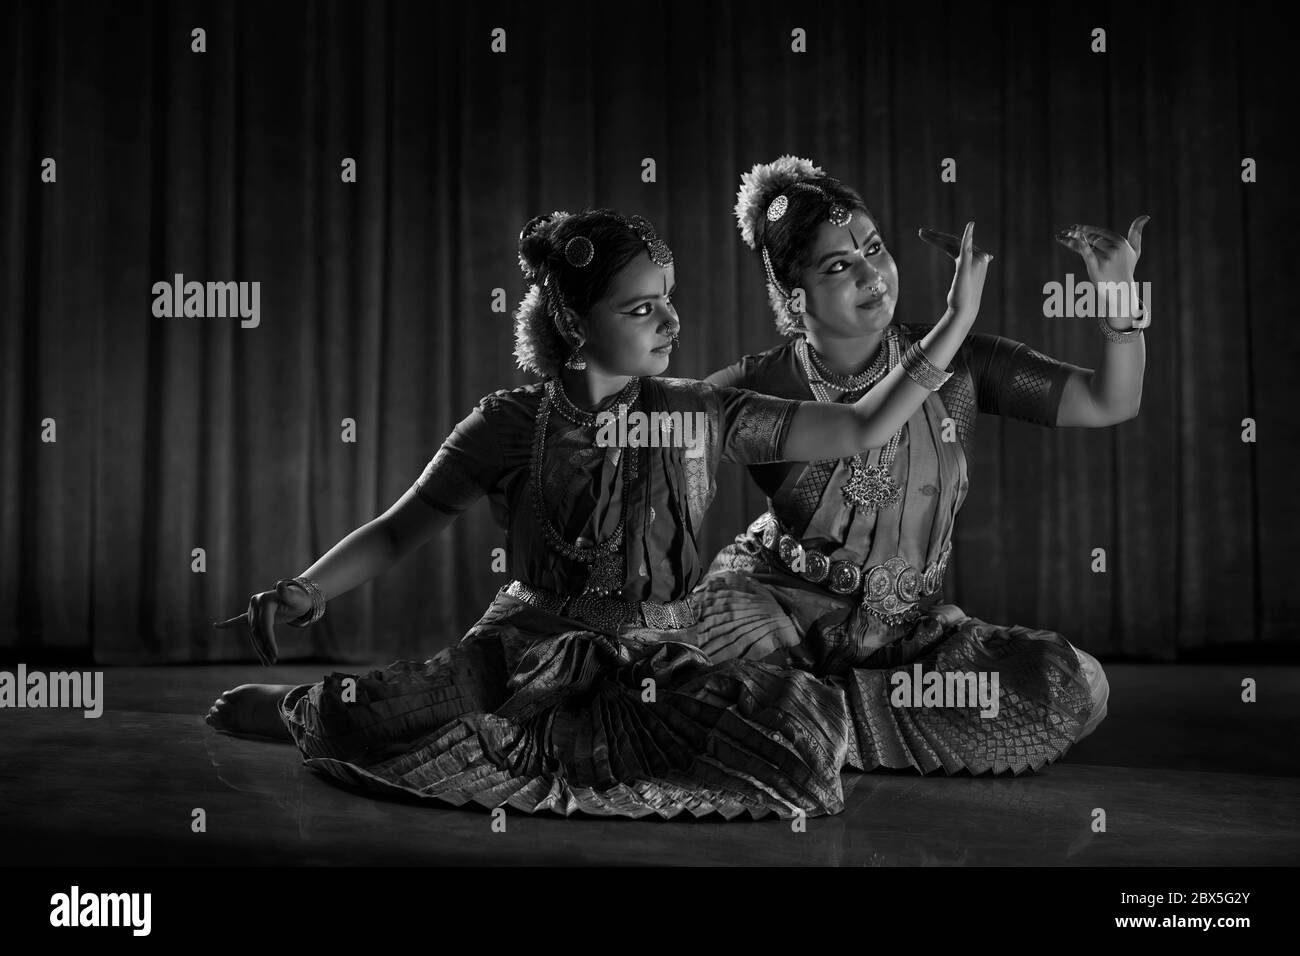 Black and white image of a bharatnatyam dancer teaching her young student. Stock Photo